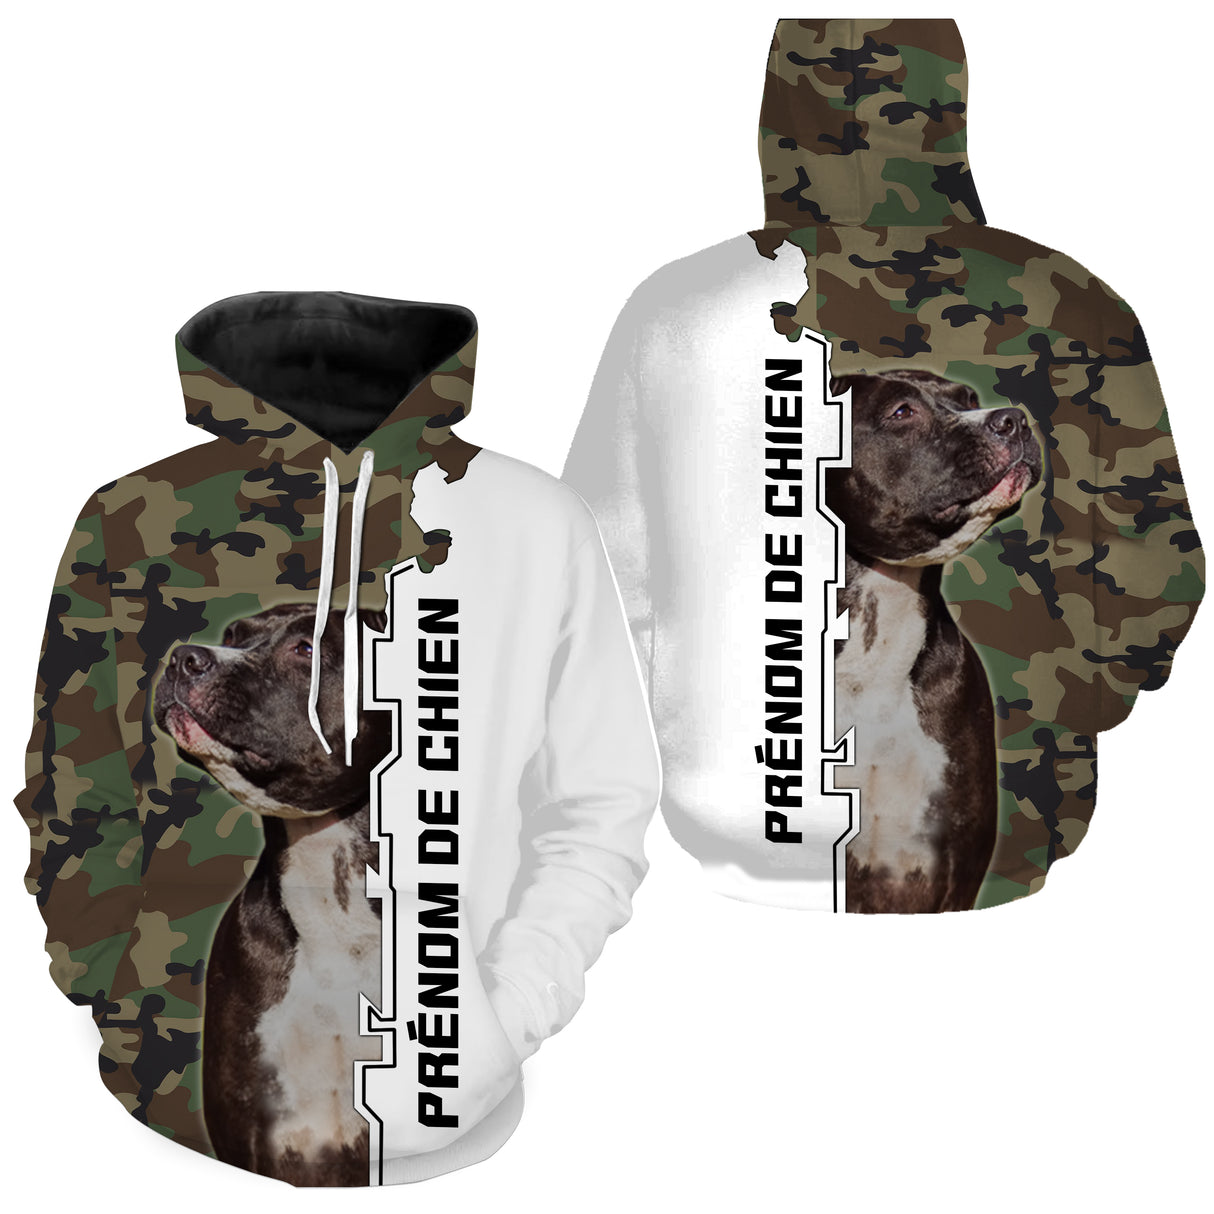 Staffordshire Bull Terrier, Dog Breed Originating from England, T-shirt, Hoodie for Men, Women, Personalized Gift - CTS14042214